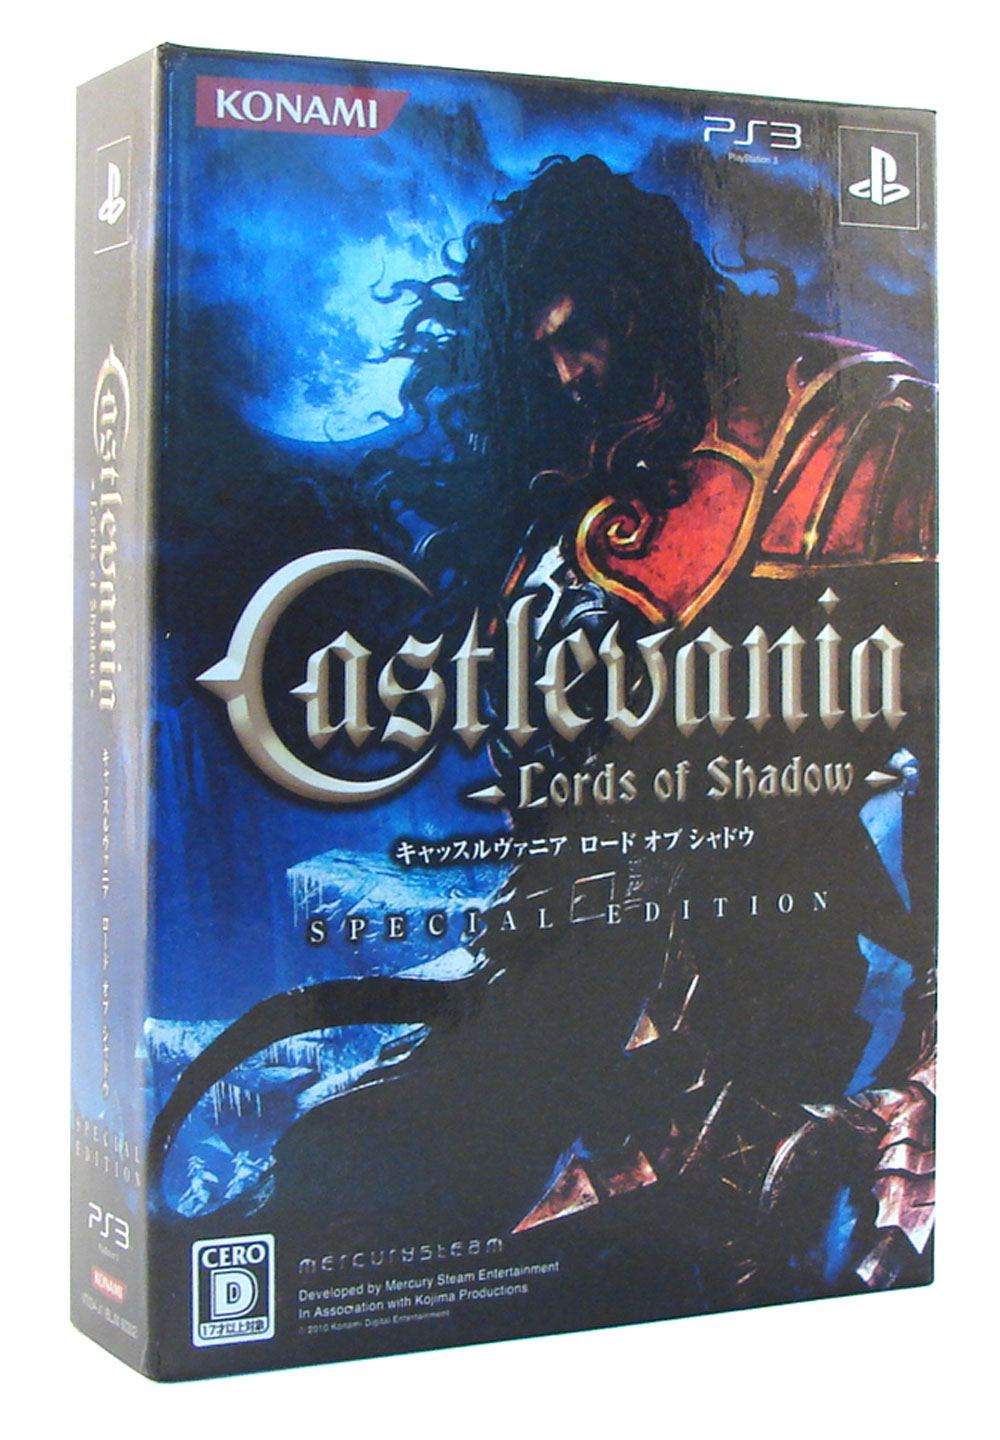 Castlevania: Lords of Shadow - PlayStation 3 Standard Edition